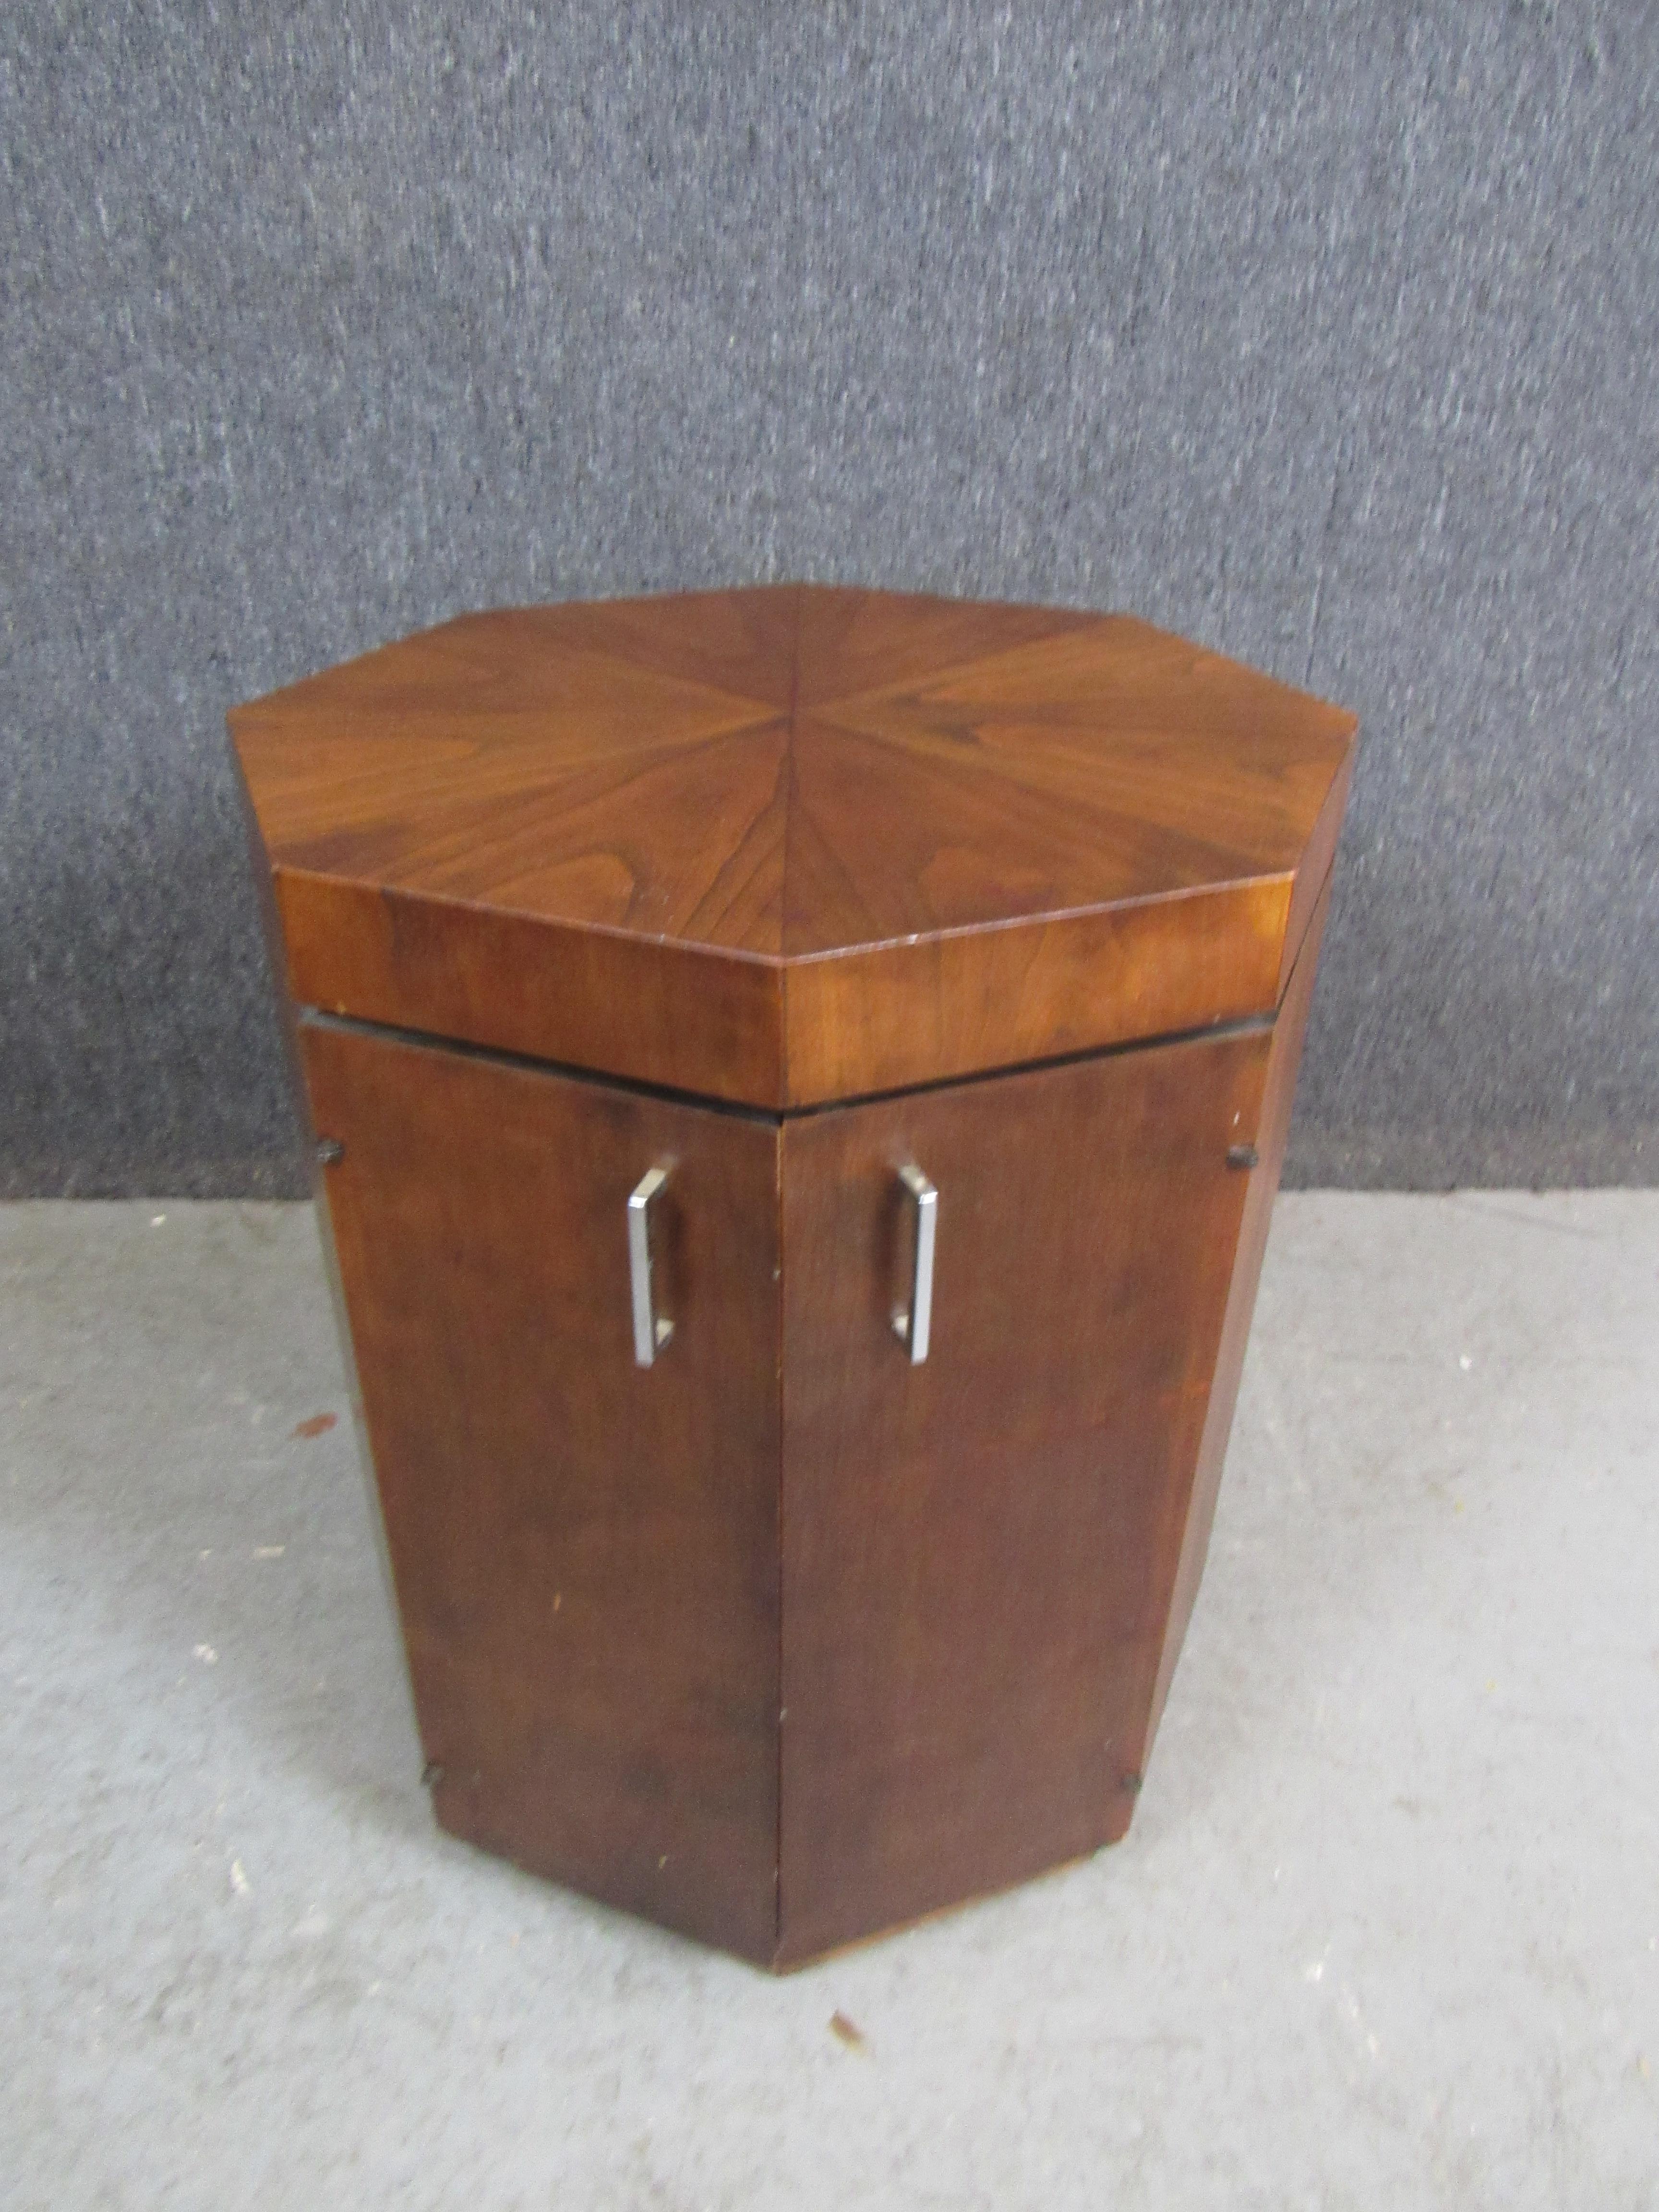 Make your home decor stand out from the crowd with this beautiful octagonal side table/cabinet. It's unique shape lends to it's spellbinding kaleidoscopic walnut veneered top, resulting in a practical piece that will create an impression for many